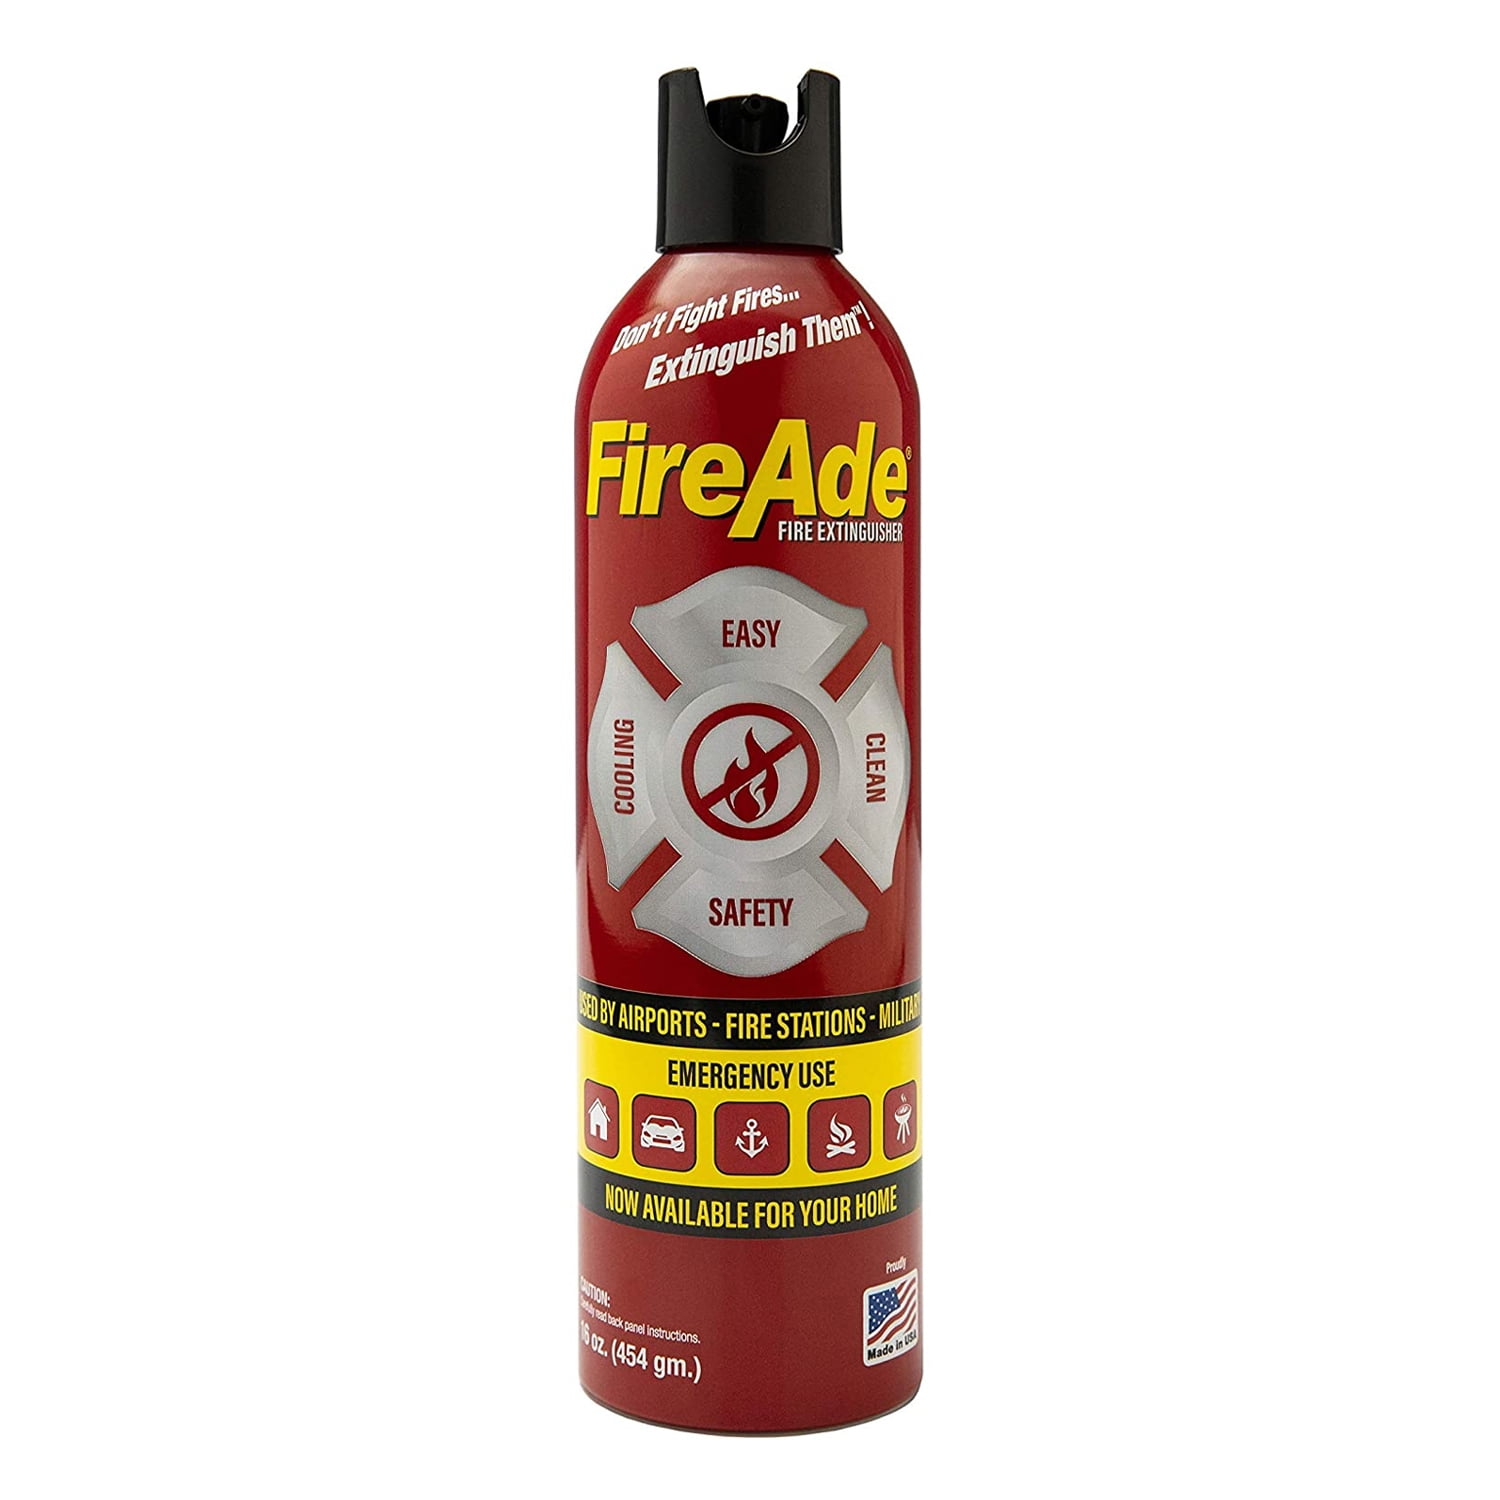 Details about   Fire Extinguisher Home Car Office Safety Kidde 5-B:C 3-lb Disposable Marine NEW 